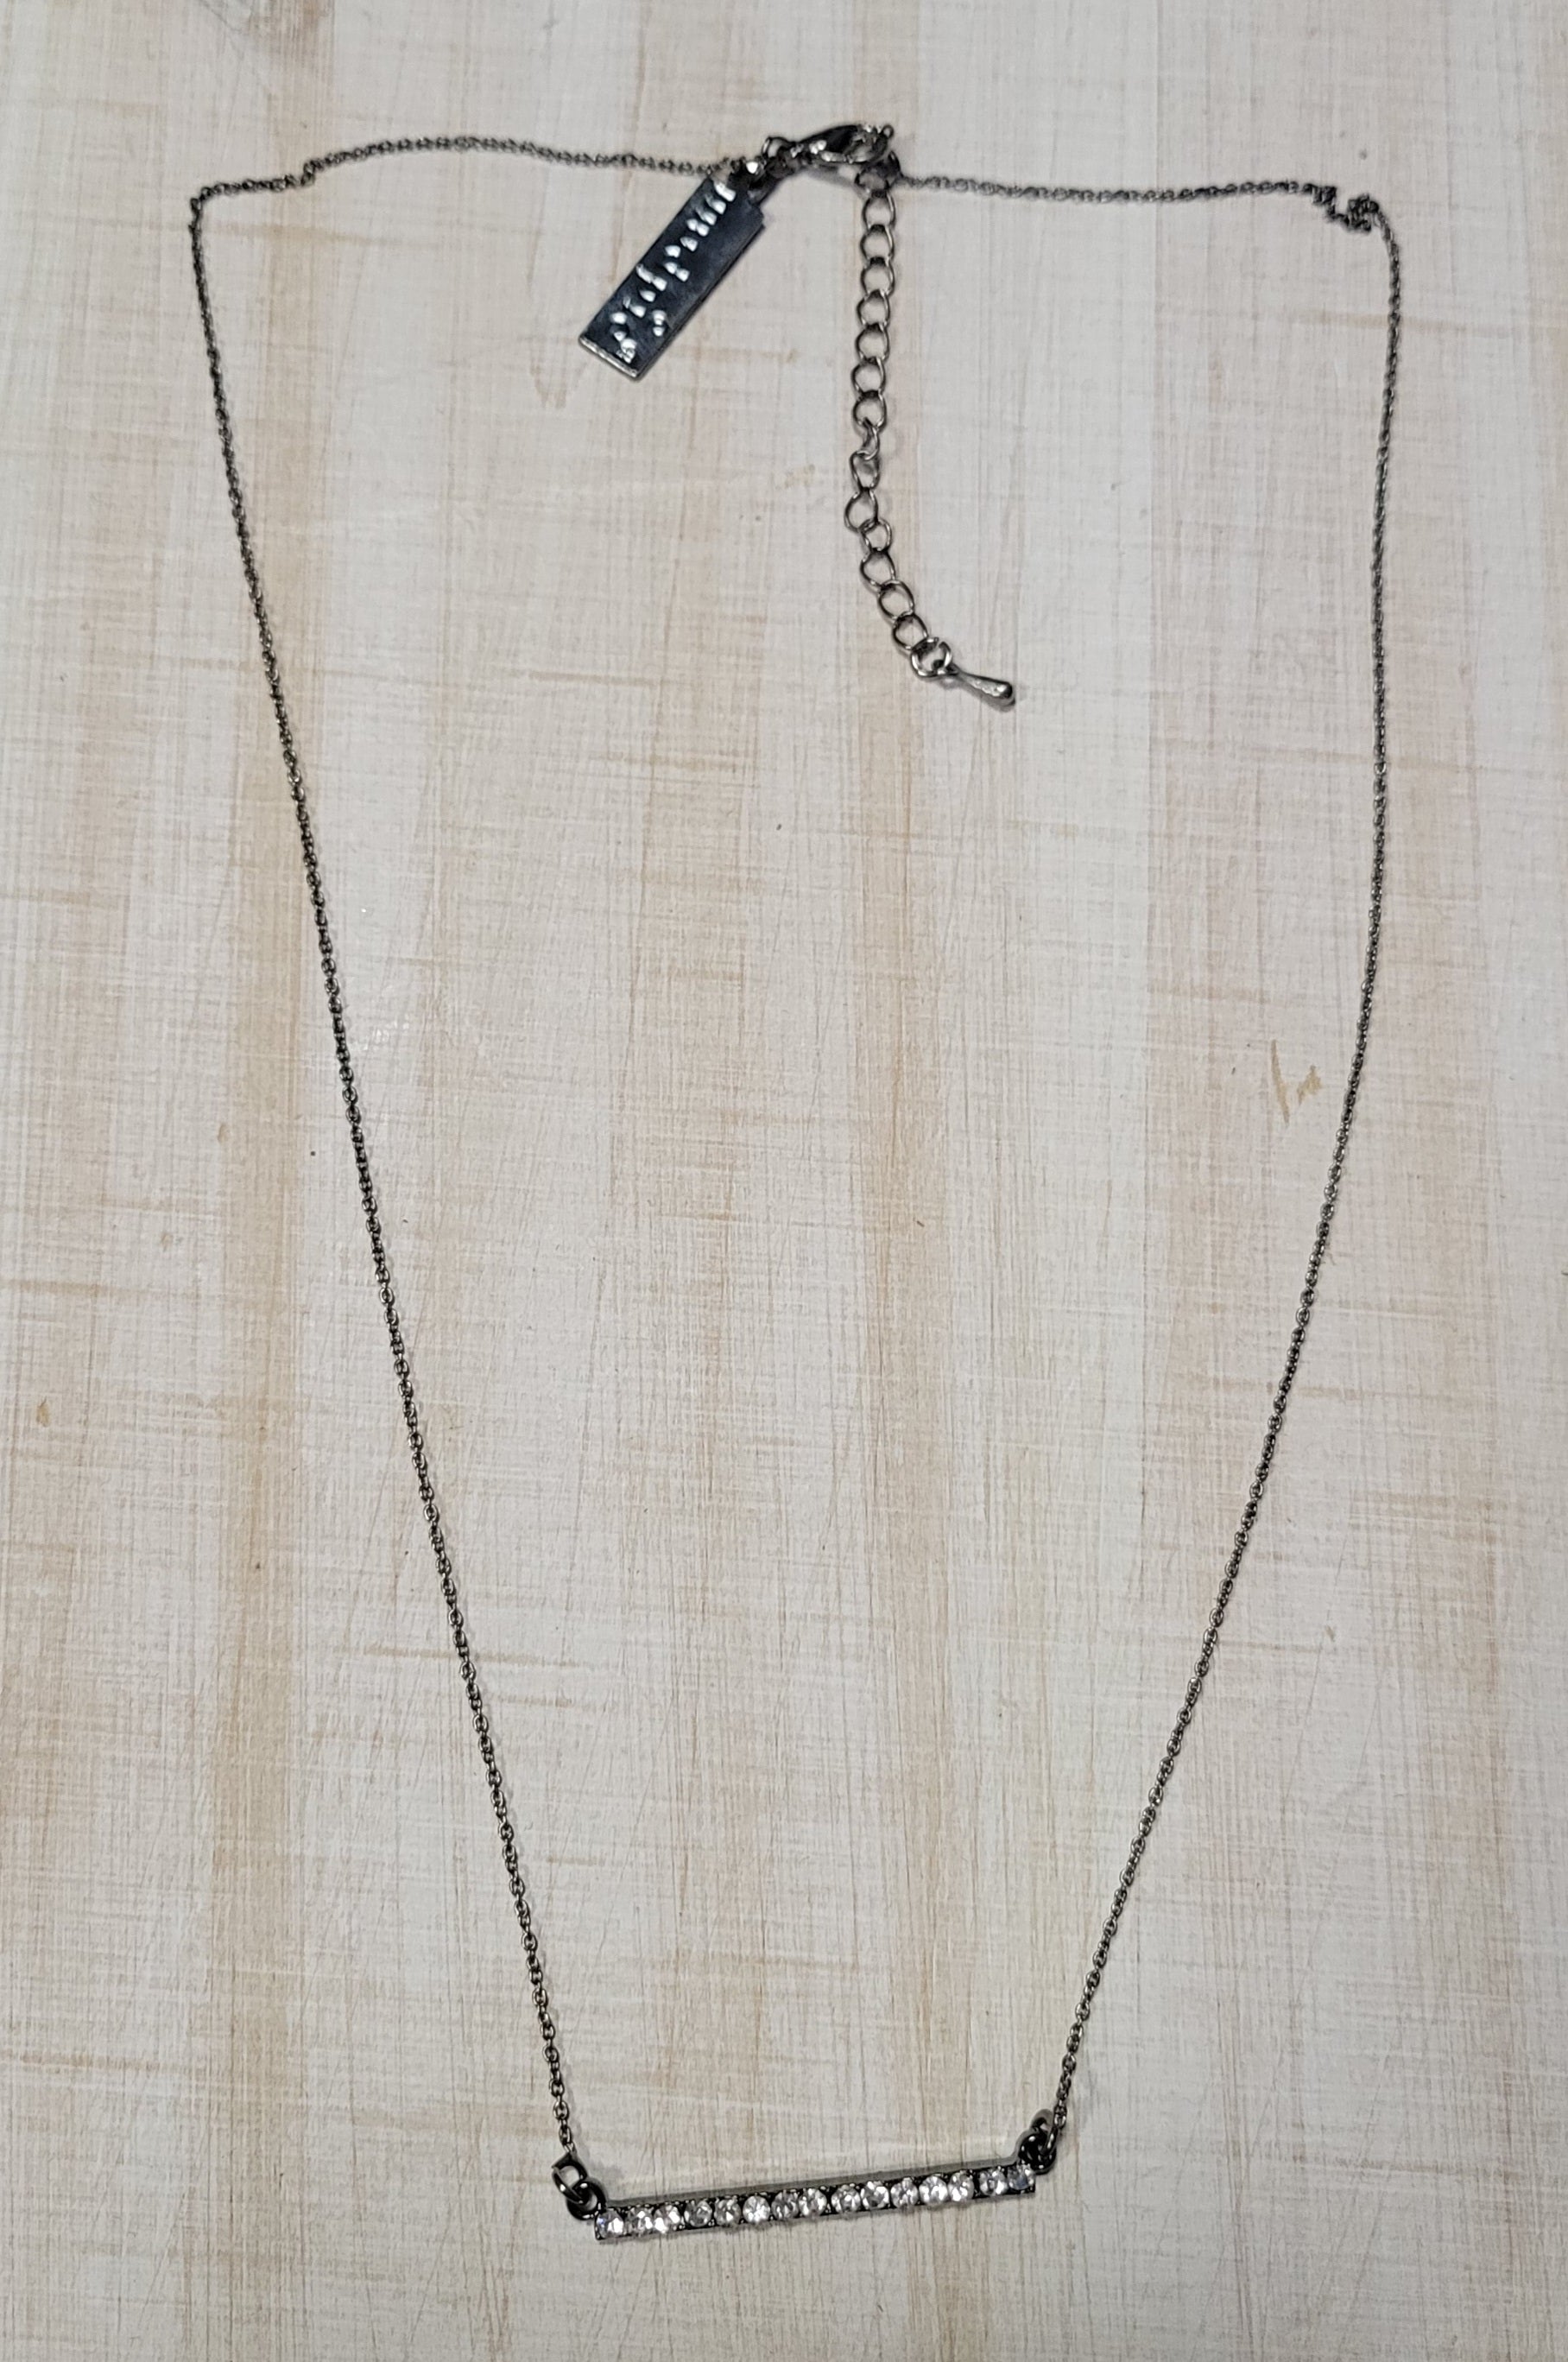 18" chain length Necklace